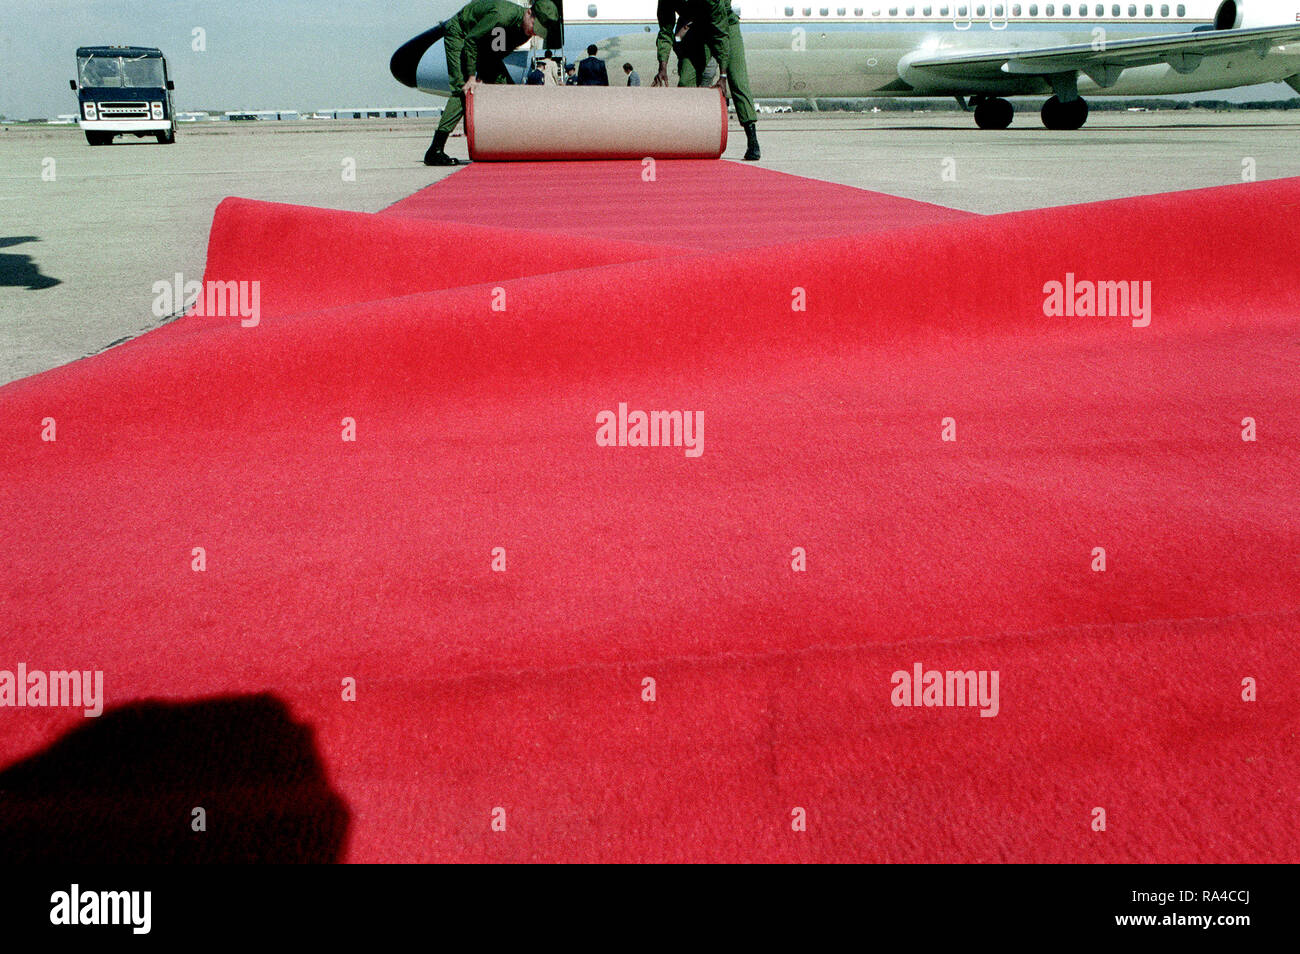 1980 - Airmen place a red carpet on the ground for Prime Minister Menachem Begin of Israel prior to his departure from the United States after his visit. Stock Photo